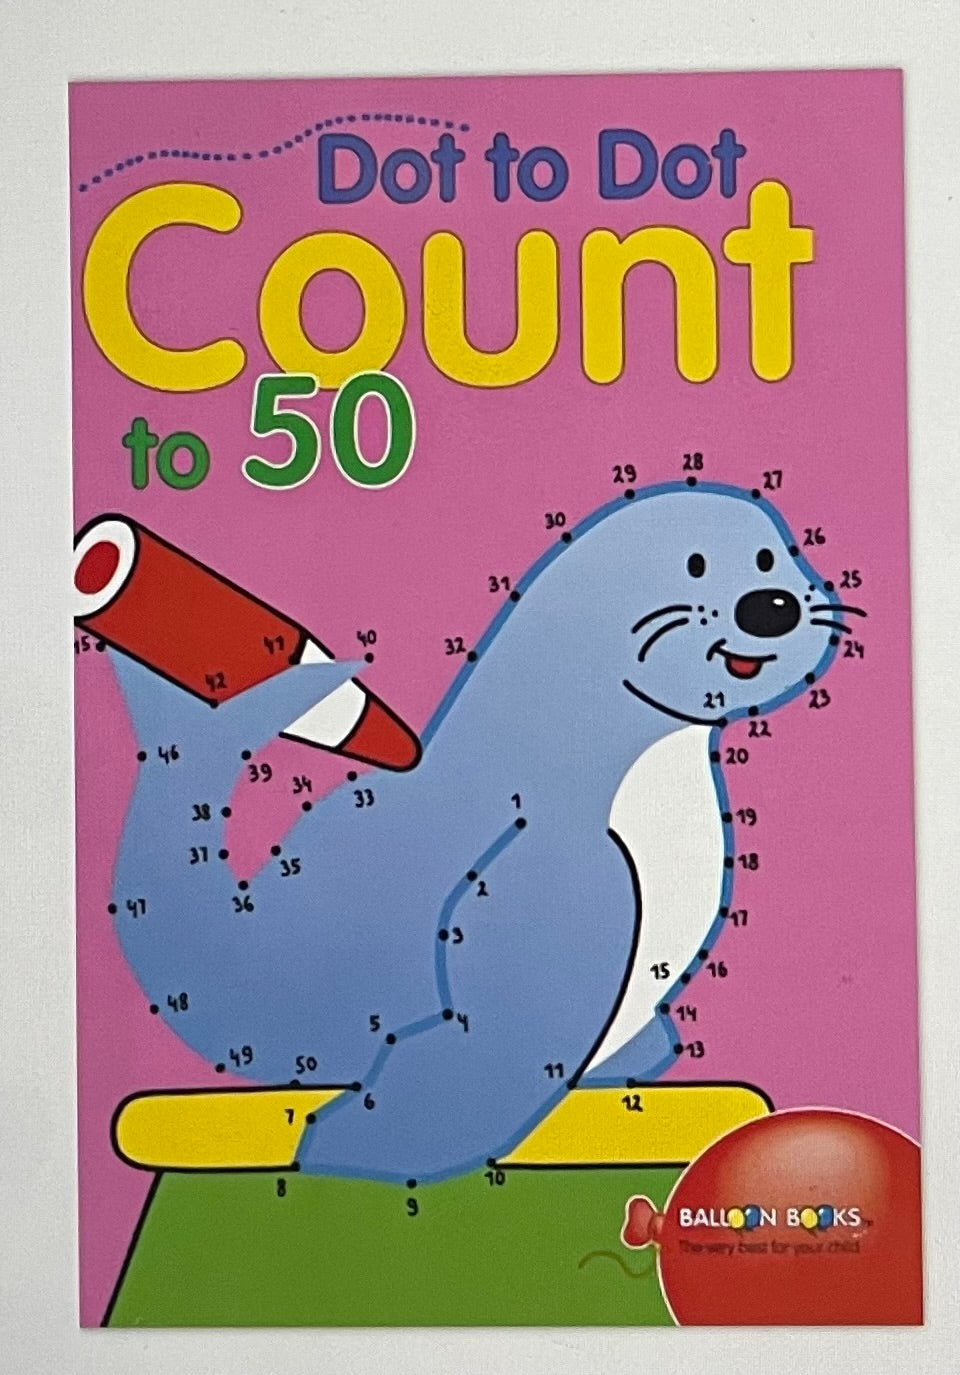 DOT TO DOT COUNT TO 50